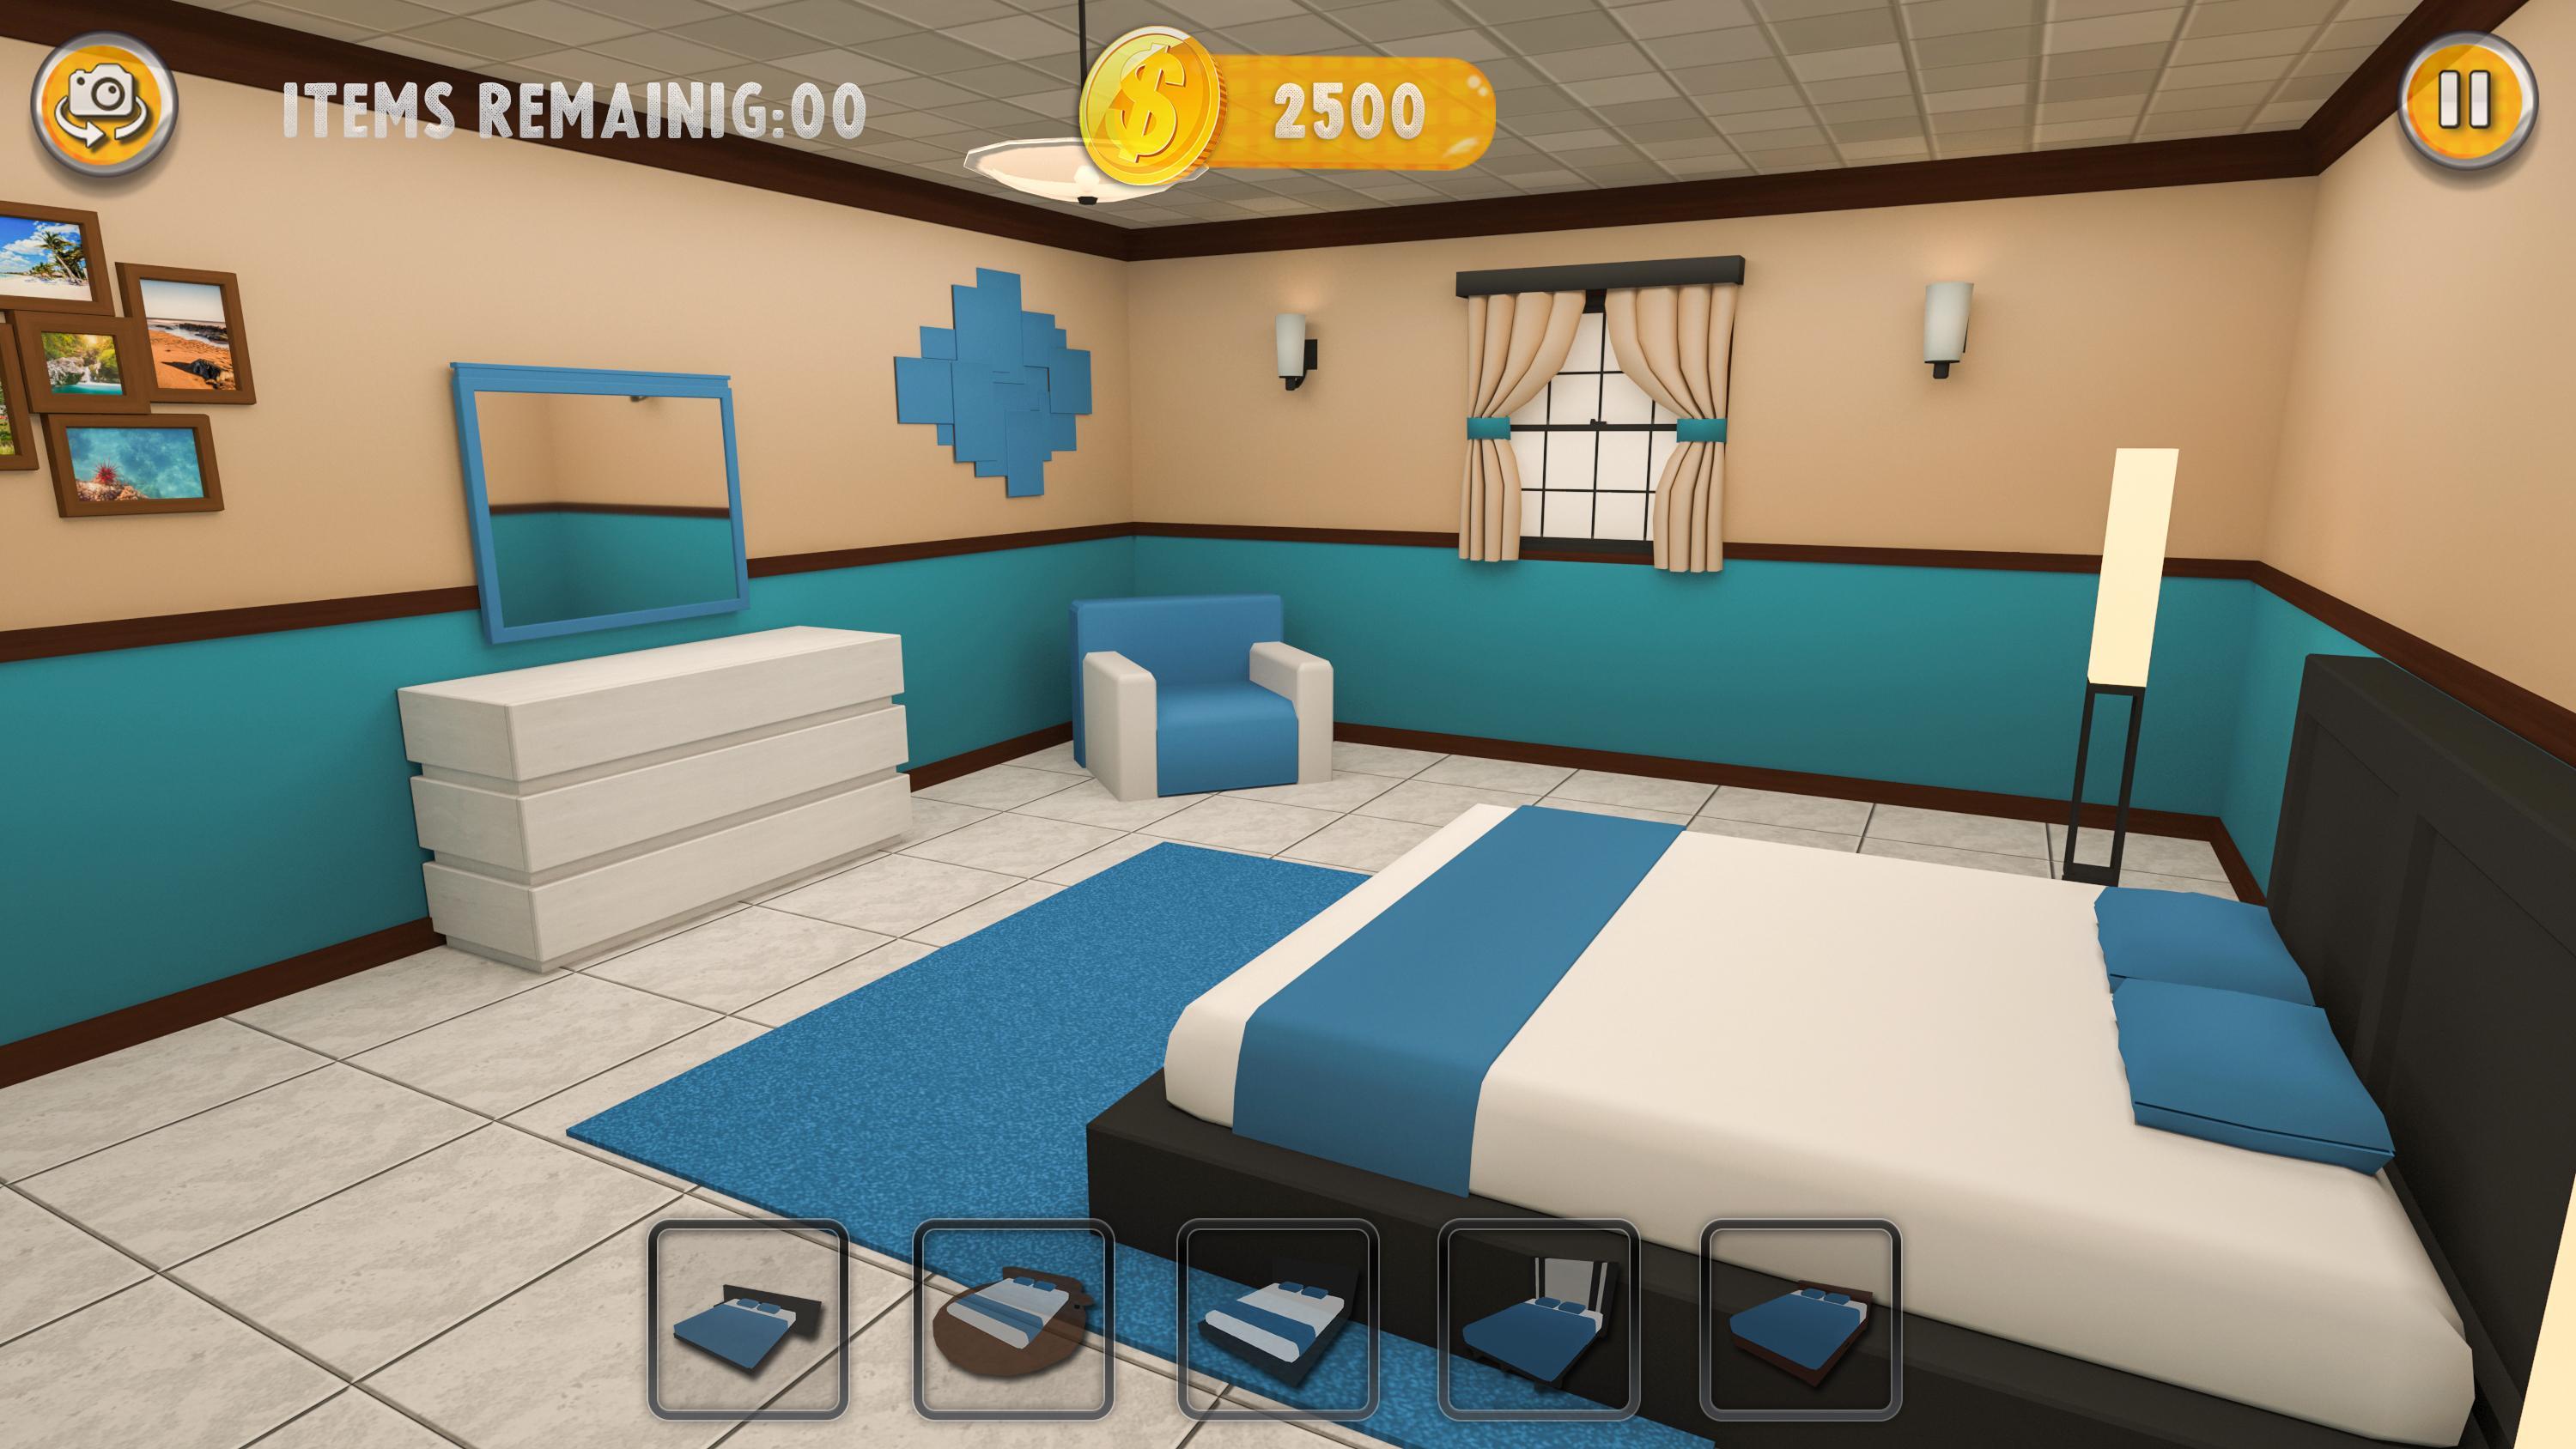 House flipper: Home Makeover & Home Design Games for Android - APK Download